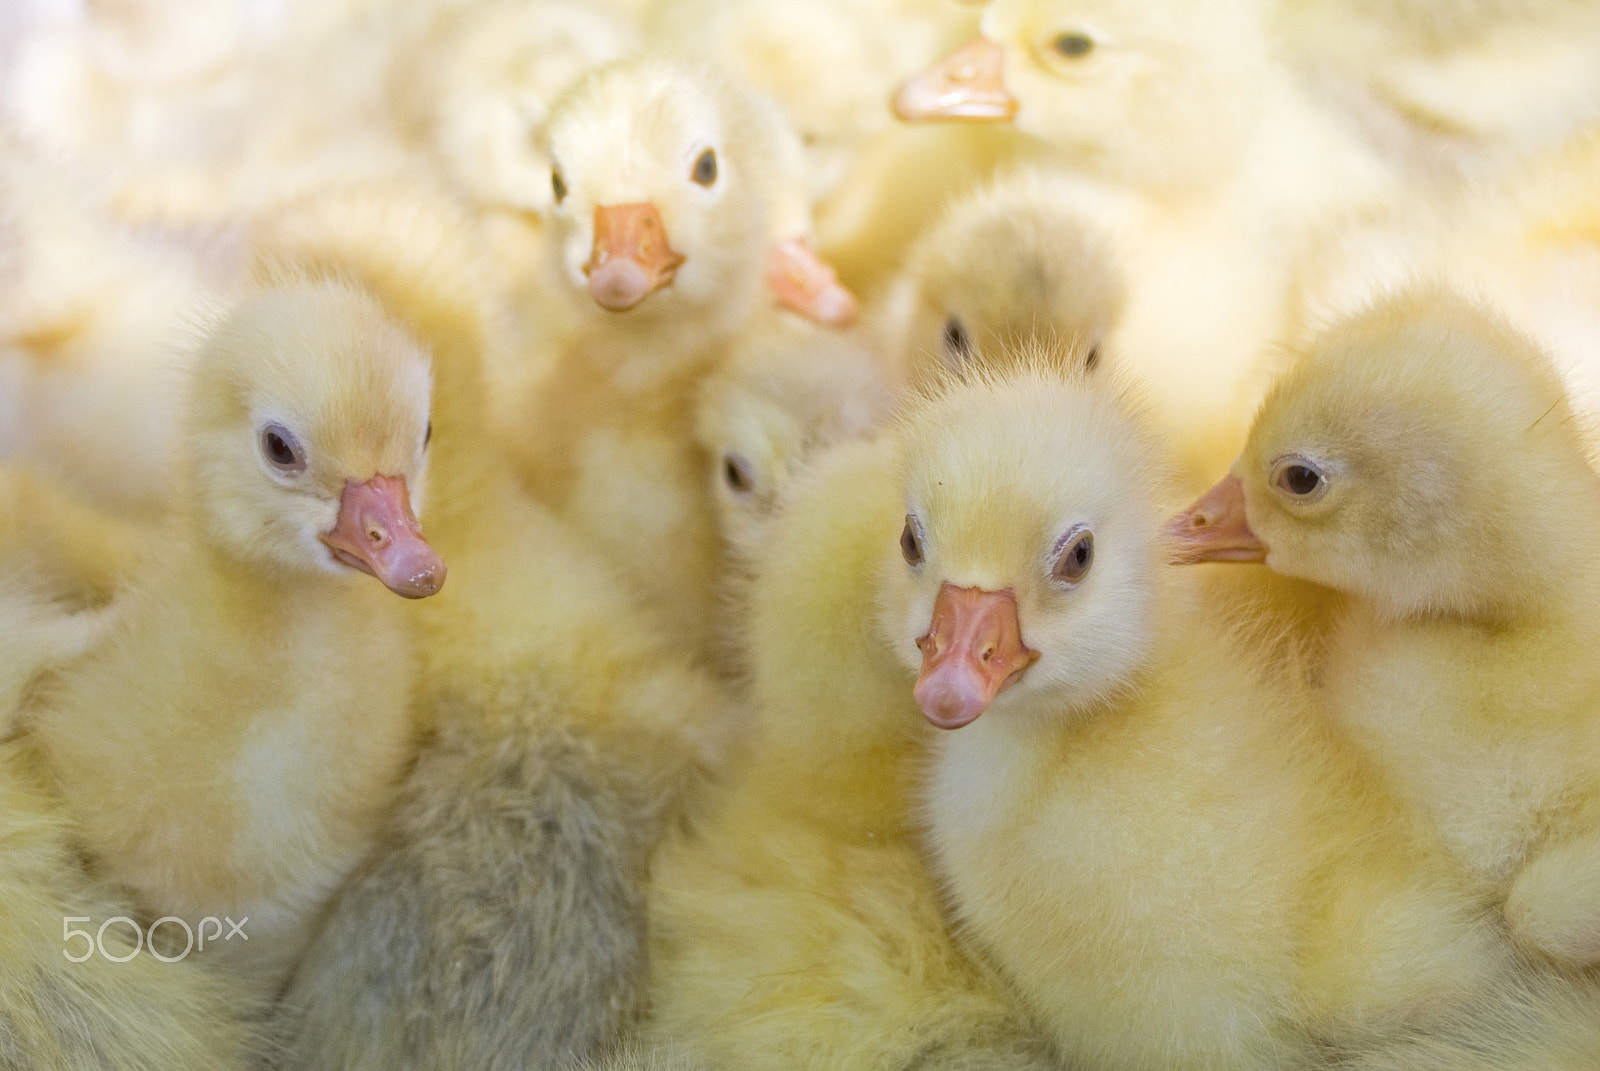 Nikon D80 + Sigma 18-50mm F3.5-5.6 DC sample photo. Little yellow ducklings photography